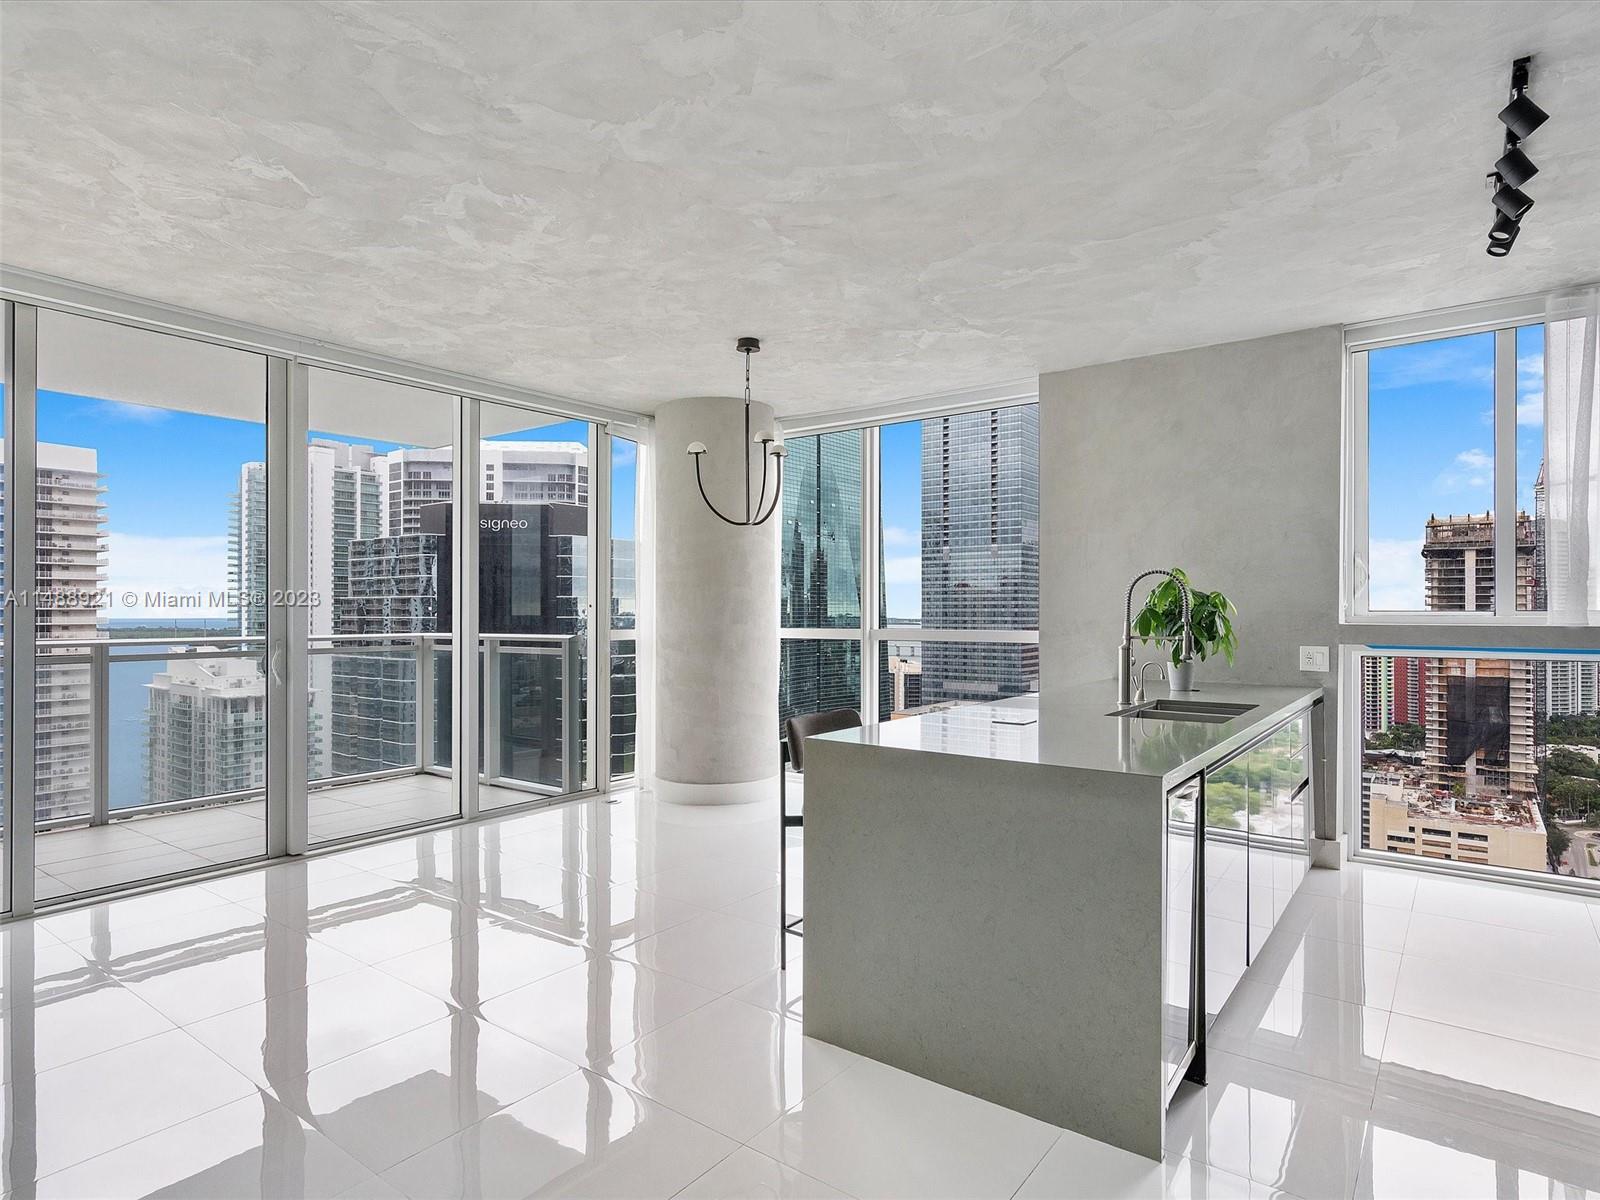 Aesthetically significant unit boasting 3 large beds/3 large baths in the best building in all Brickell-The Bond. After visiting famous restaurants just a short elevator trip down or after a swim in your half Olympic size pool, you enter a meticulously kept curated unit on the 29th floor. Custom made Italian import Dayoris doors, Marmorino Venetian plaster hand painted walls & ceiling, Restoration Hardware light fixtures in every space elevates your Brickell living to another level. Each bedroom has custom made closets well thought out to its last detail, all baths NK Porcelanosa hardware. Appliances in kitchen are Bosch. Balcony opens up to ocean view. Gym, kids room, clubroom, library, valet, sauna, steam room, BBQ, & receiving area for packages.